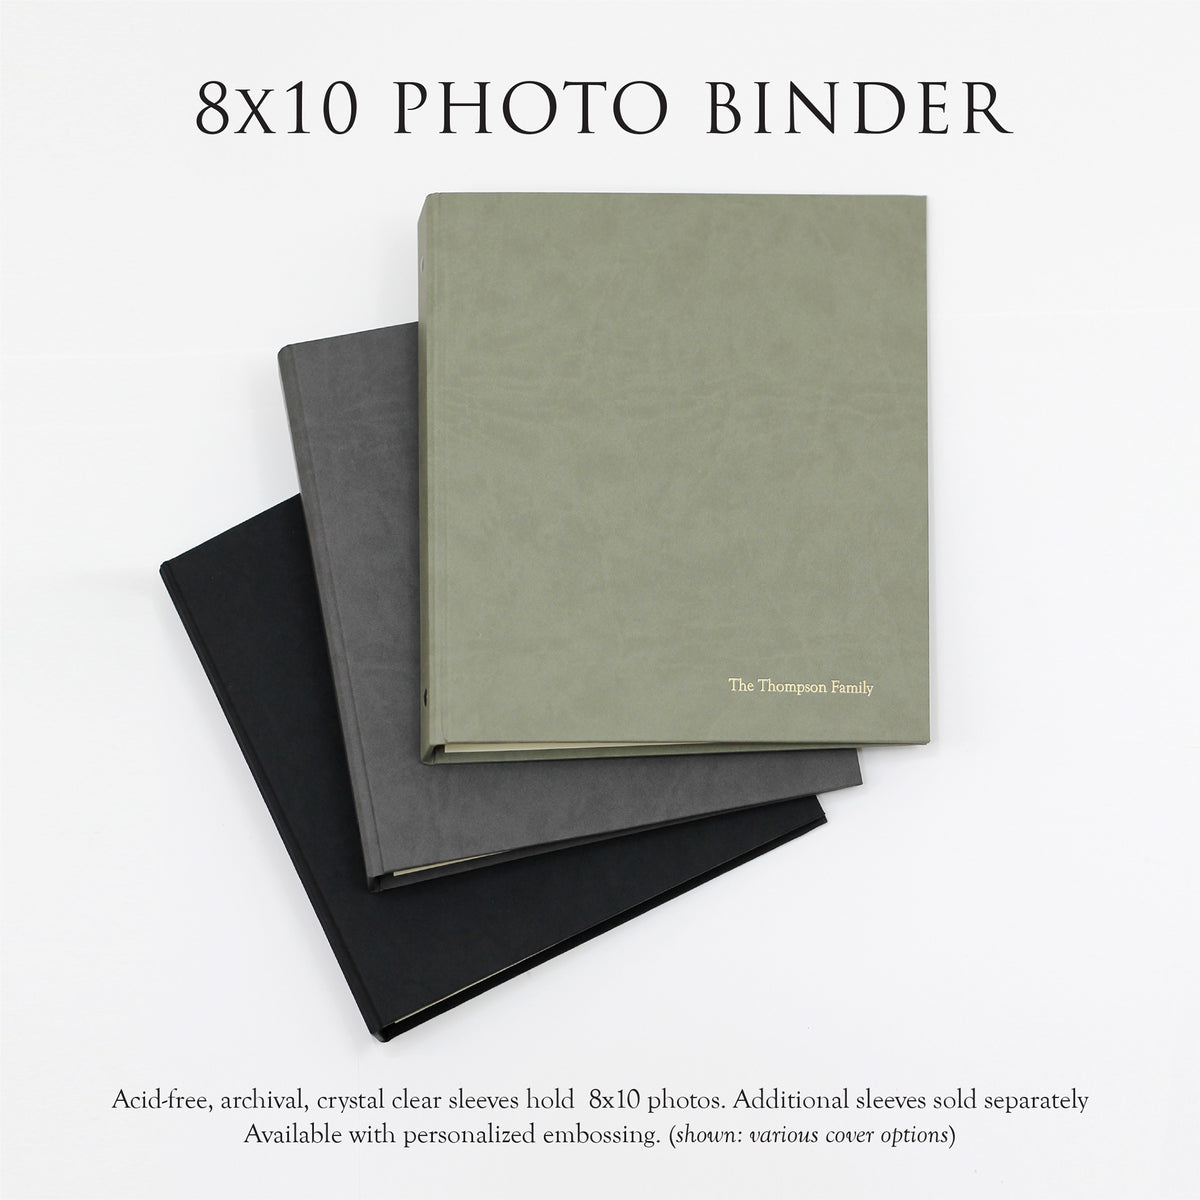 Large Photo Binder For 8x10 Photos | Cover: White Vegan Leather | Available Personalized